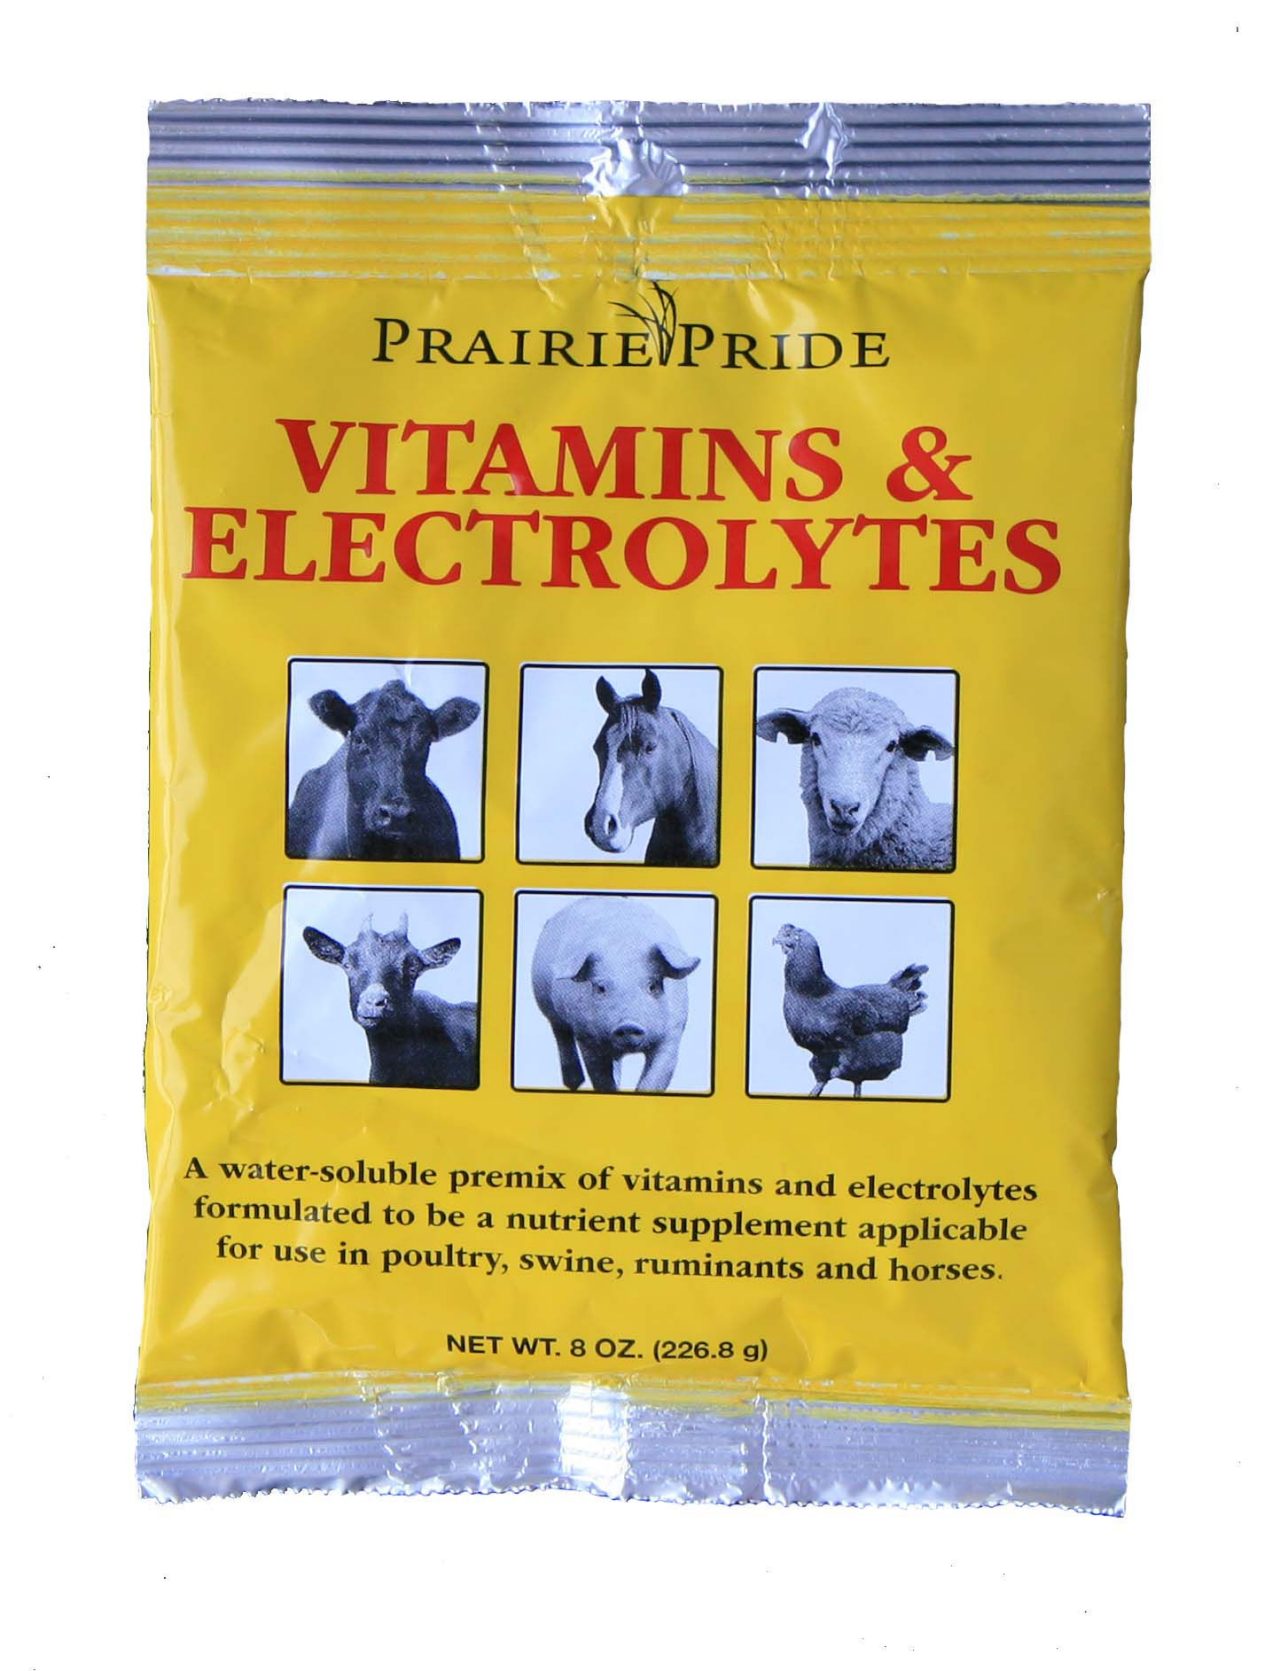 Image of livestock electrolytes that links to all livestock electrolytes catalog.